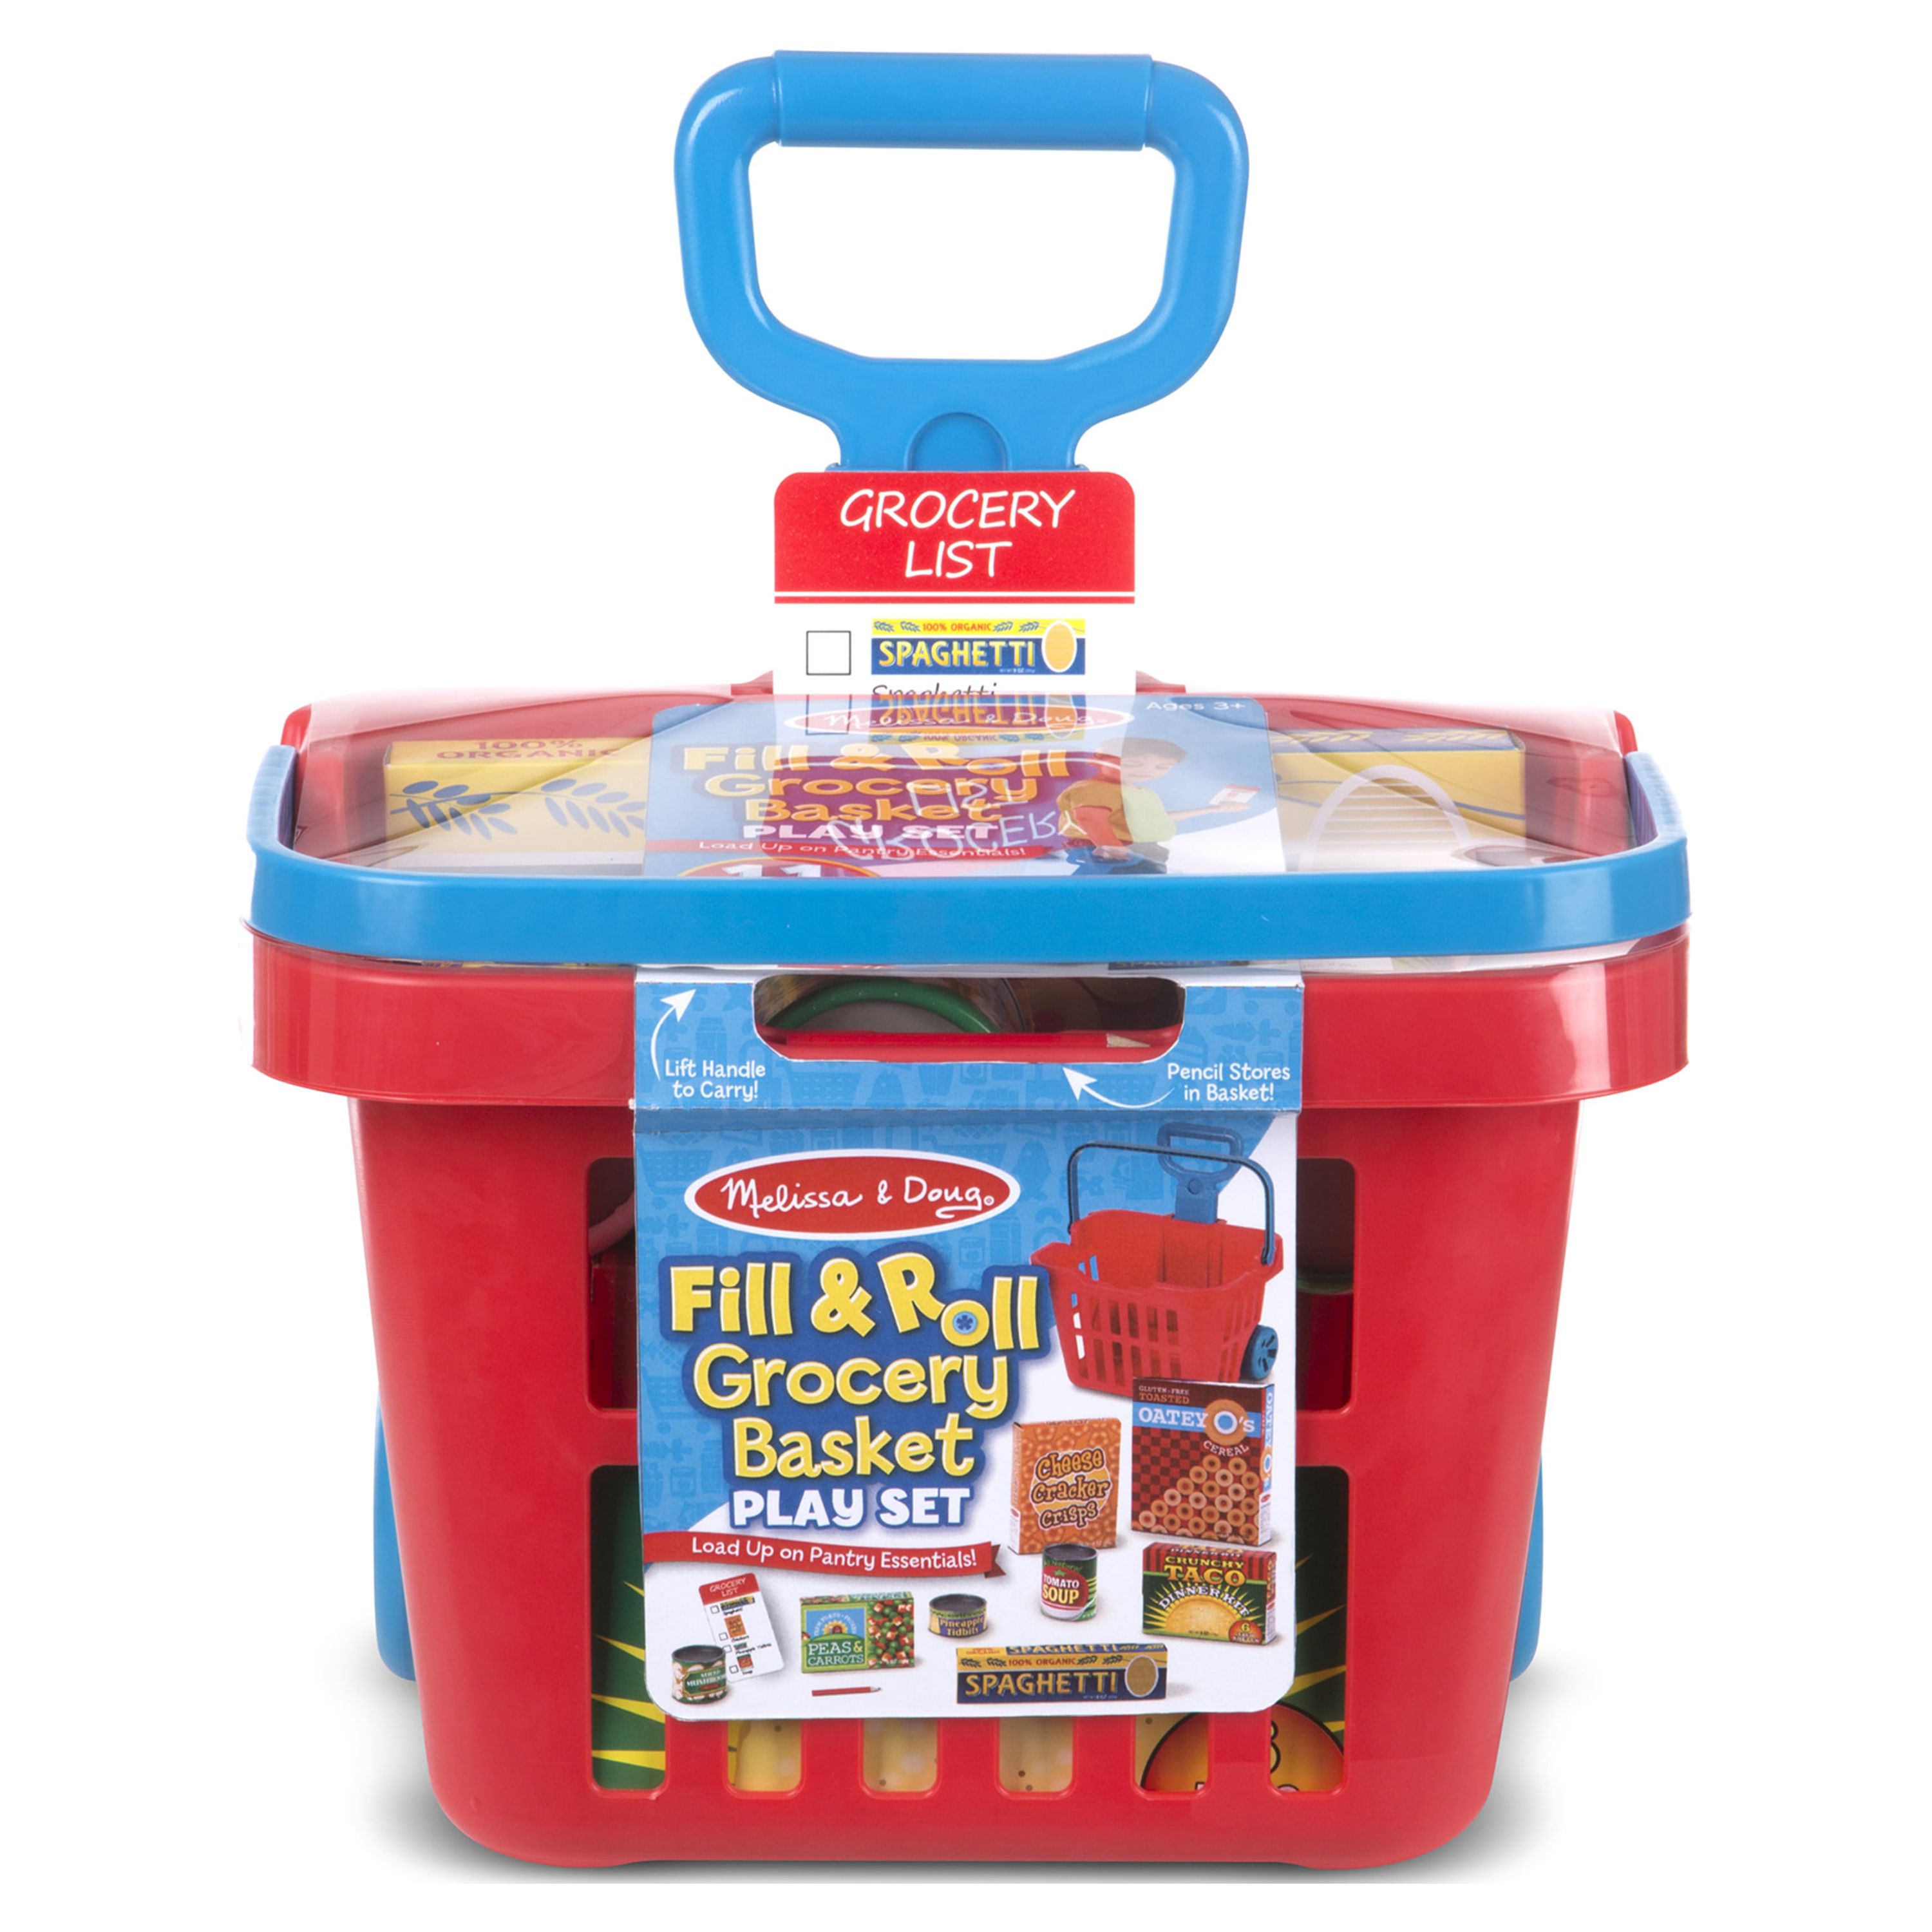 Melissa & Doug Fill and Roll Grocery Basket Play Set With Play Food Boxes and Cans (11 pcs) - image 4 of 10